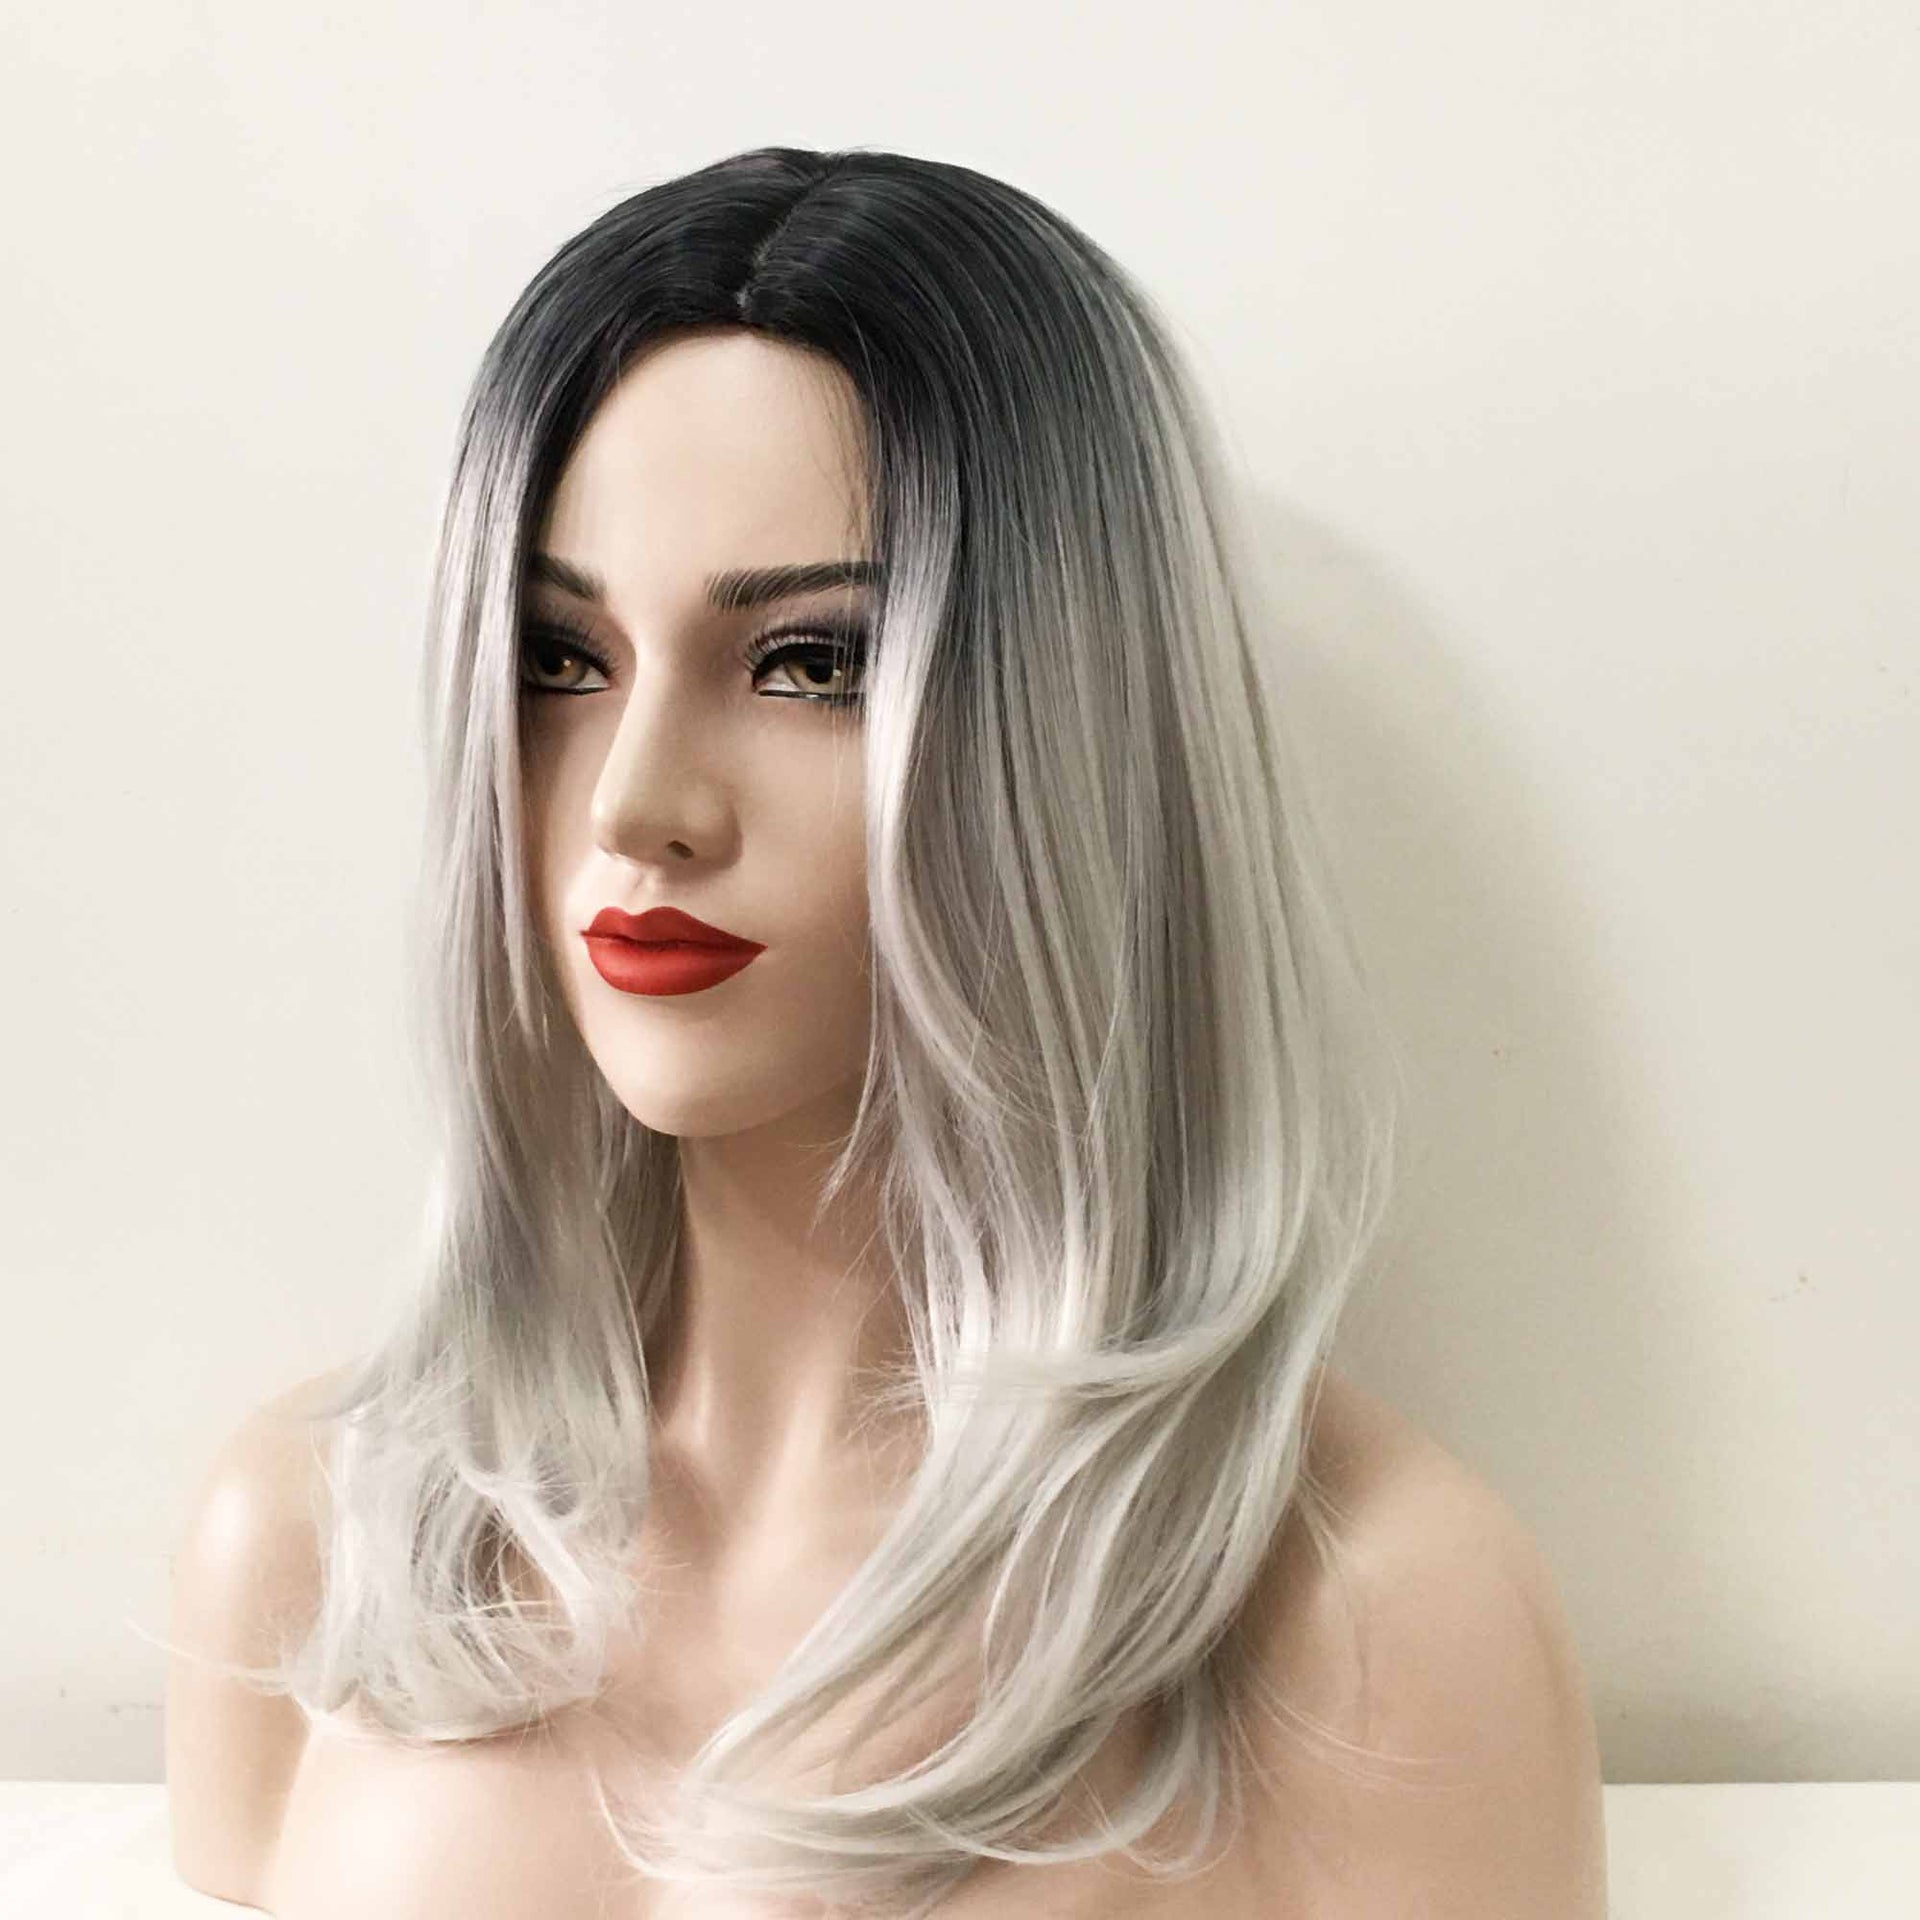 nevermindyrhead Women Grey Ombre Dark Root Long Straight Middle Part Wig